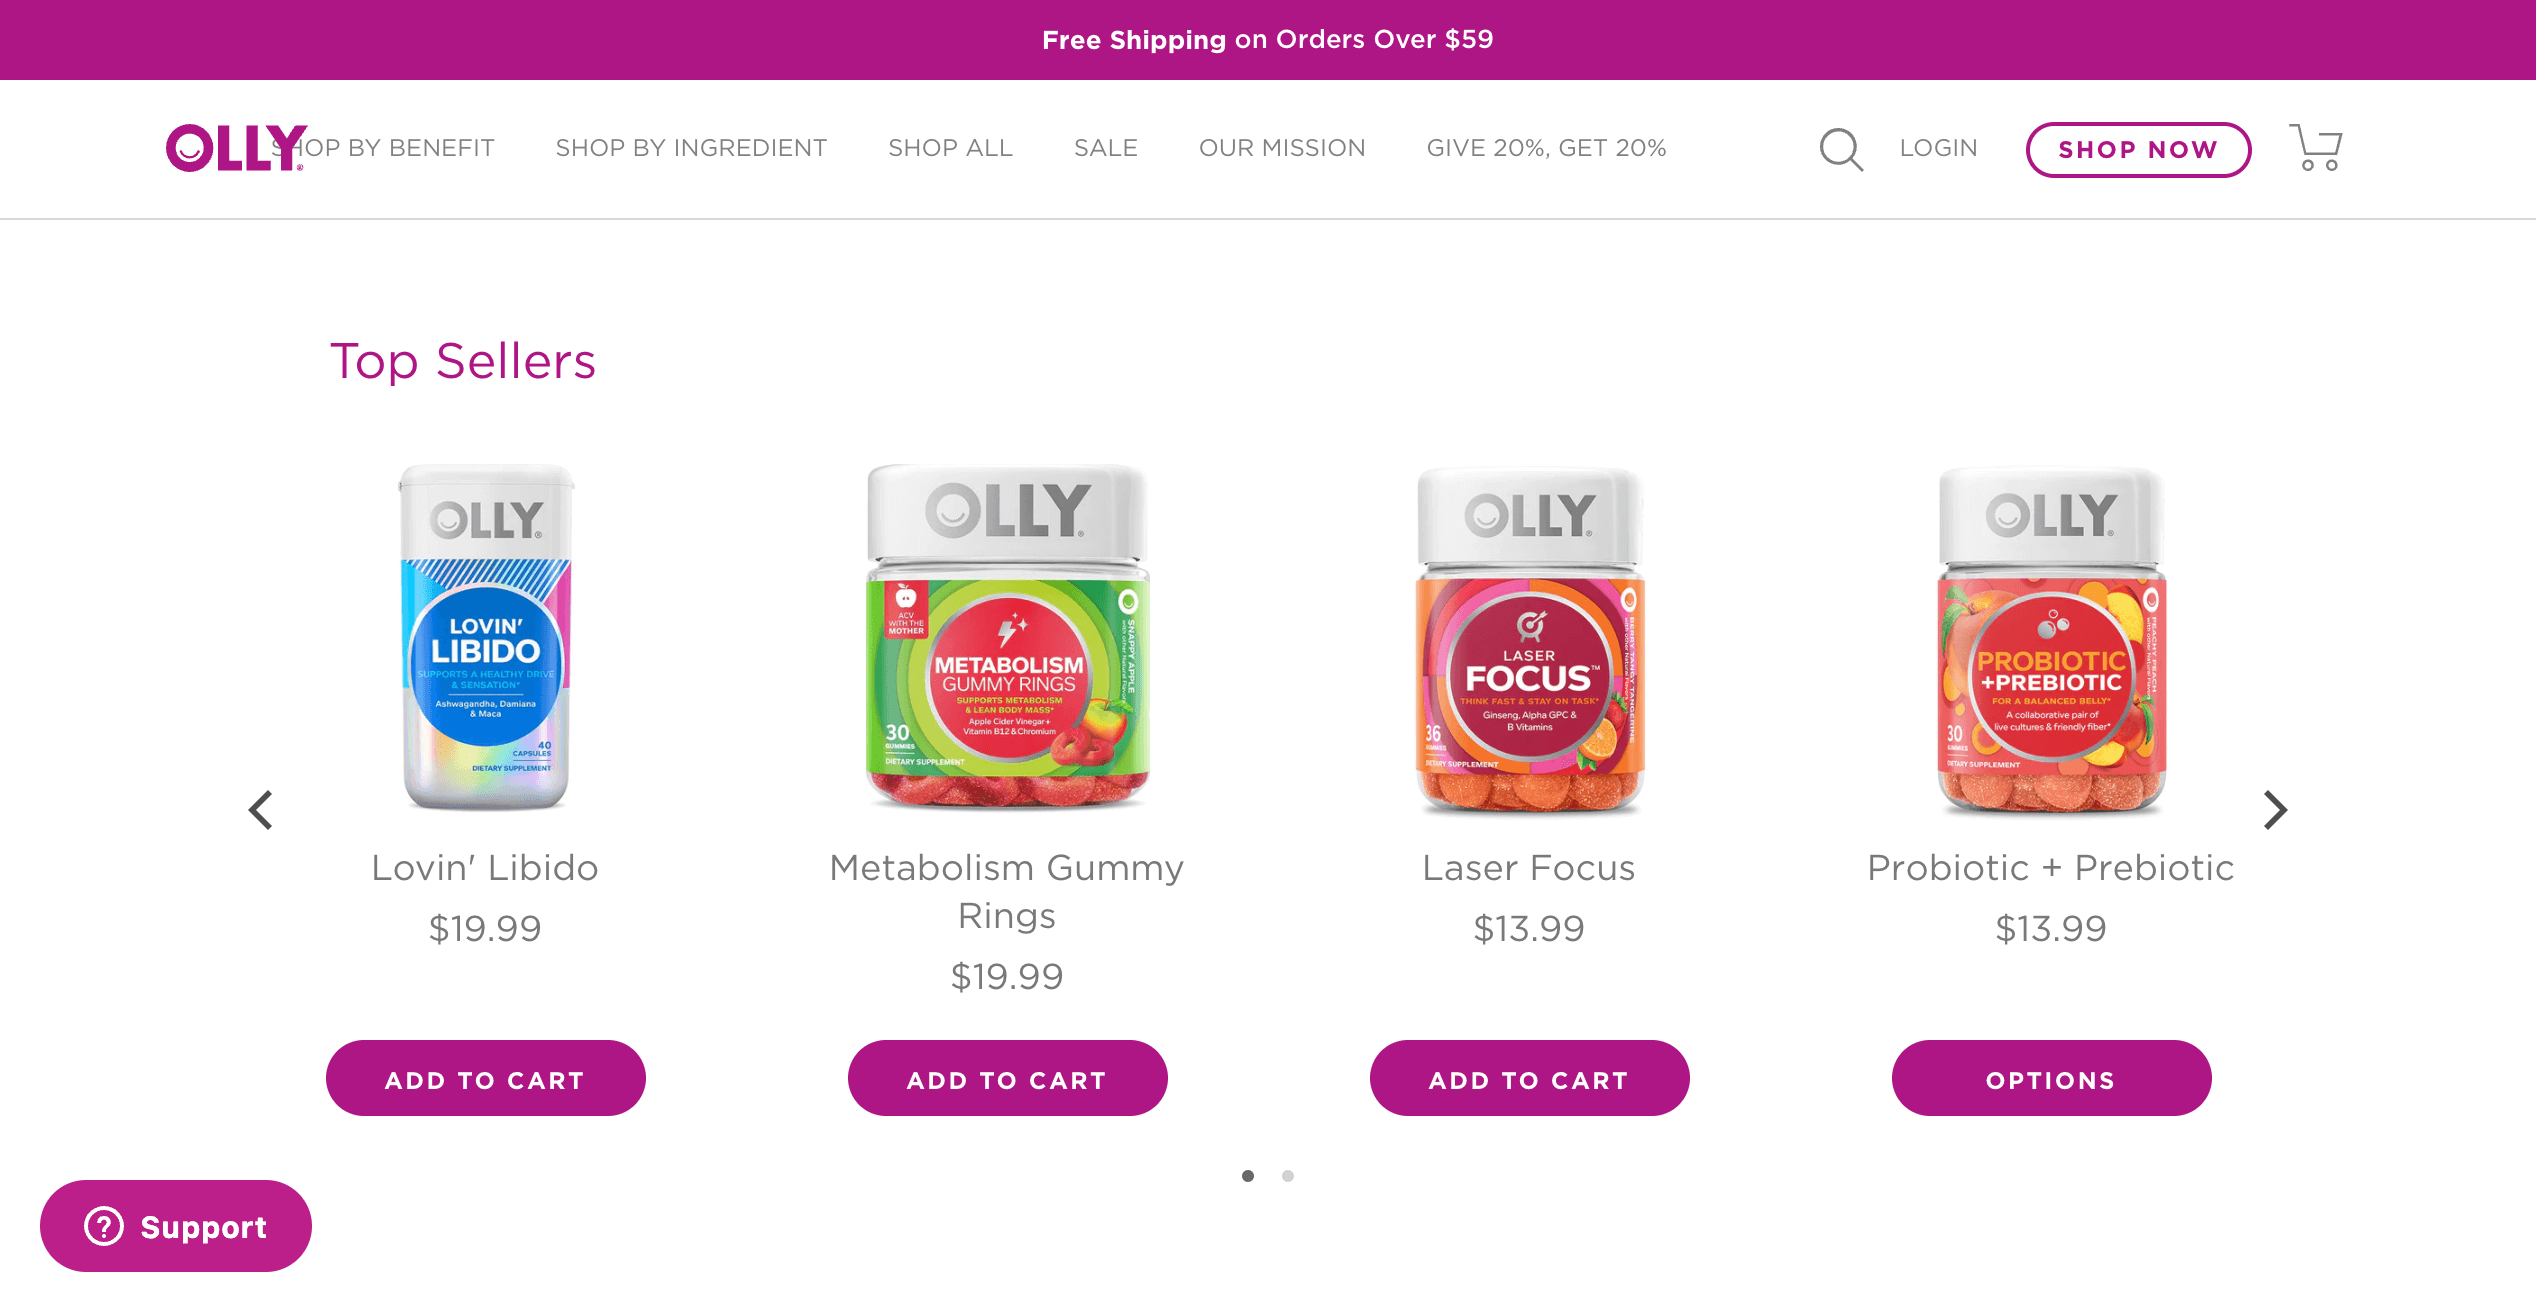 OLLY Homepage Cross-Sells compressed